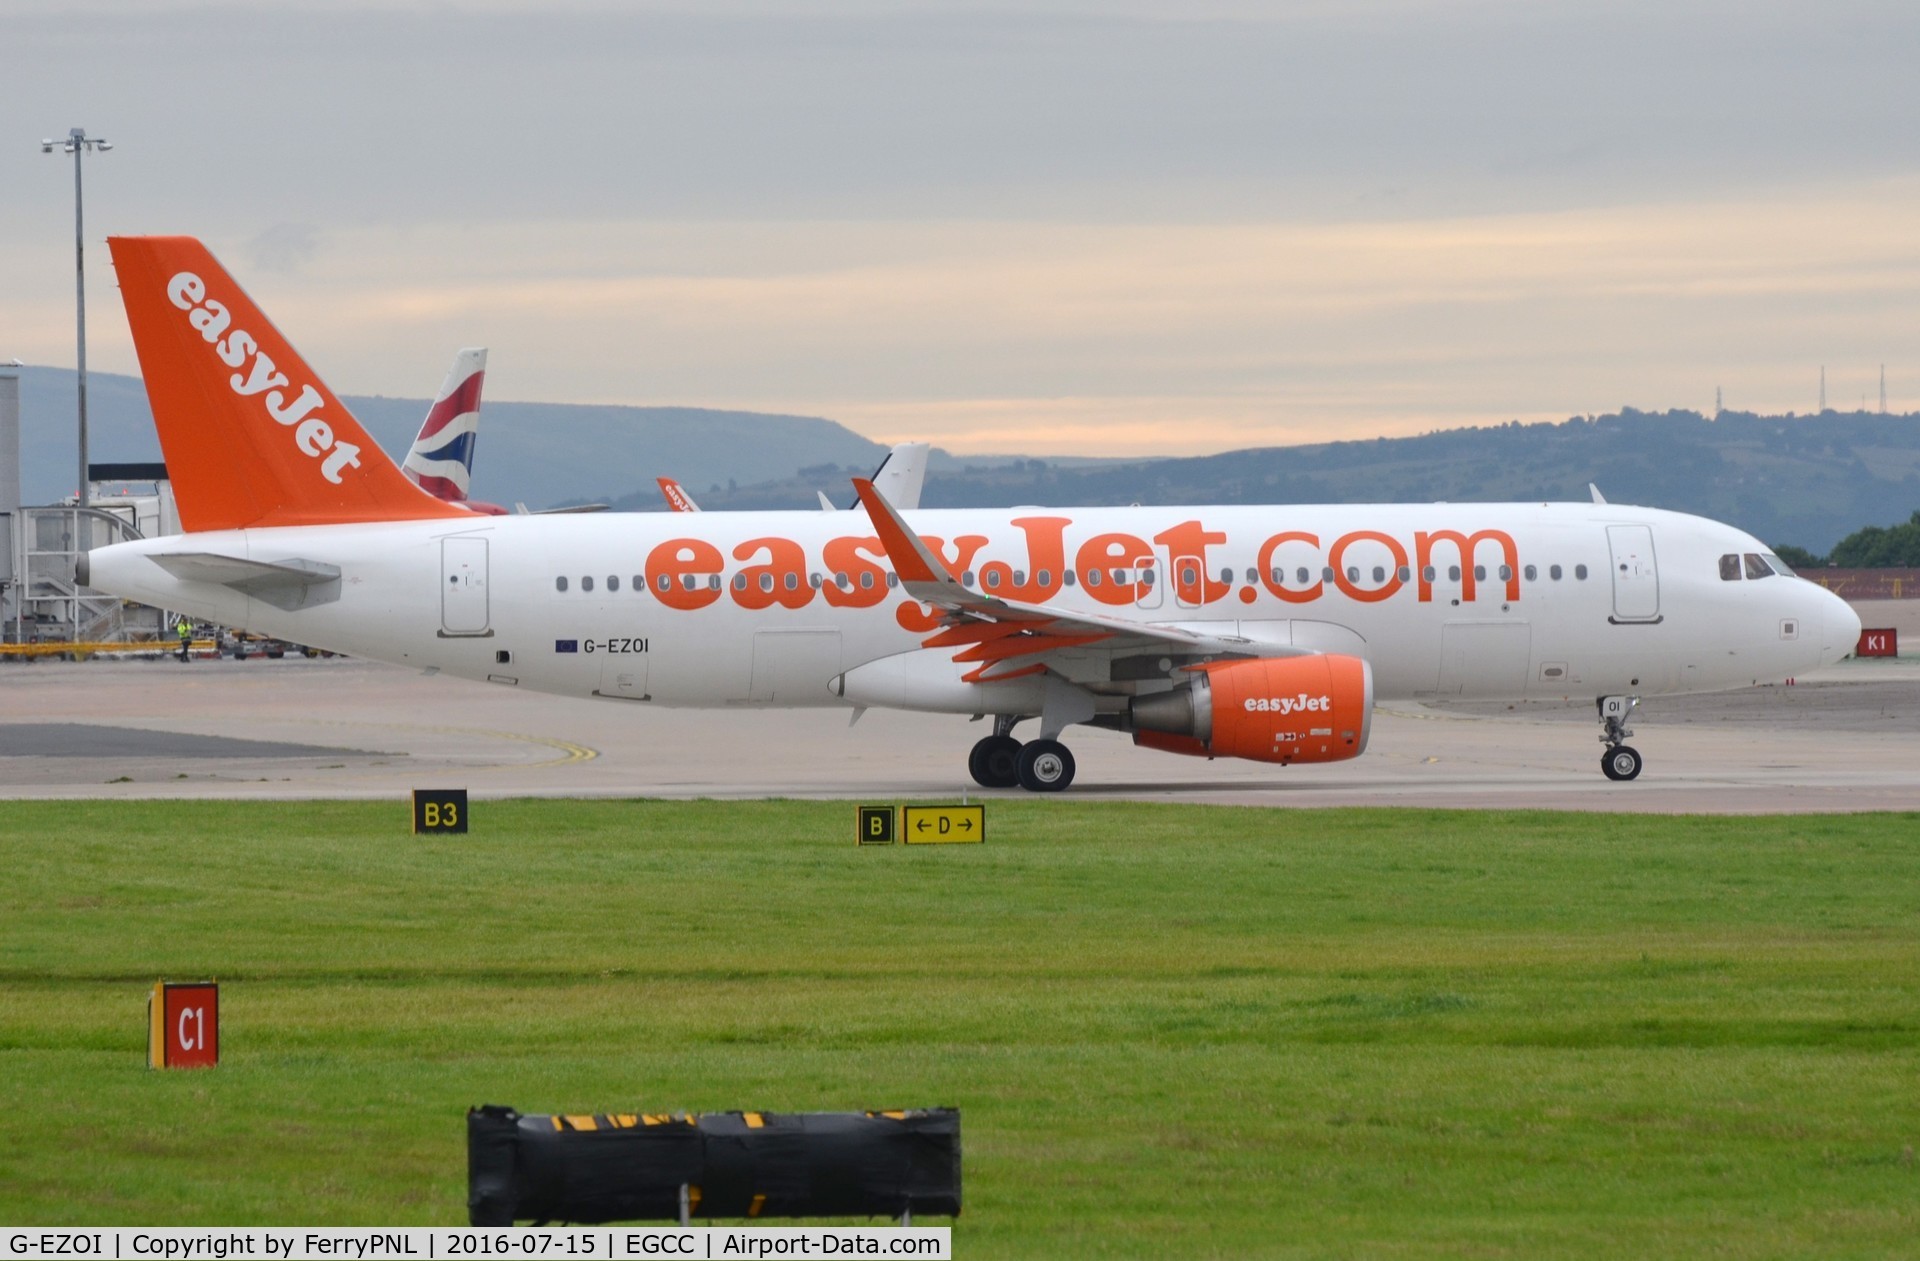 G-EZOI, 2015 Airbus A320-214 C/N 6562, Easyjet A320 taxying for departure.